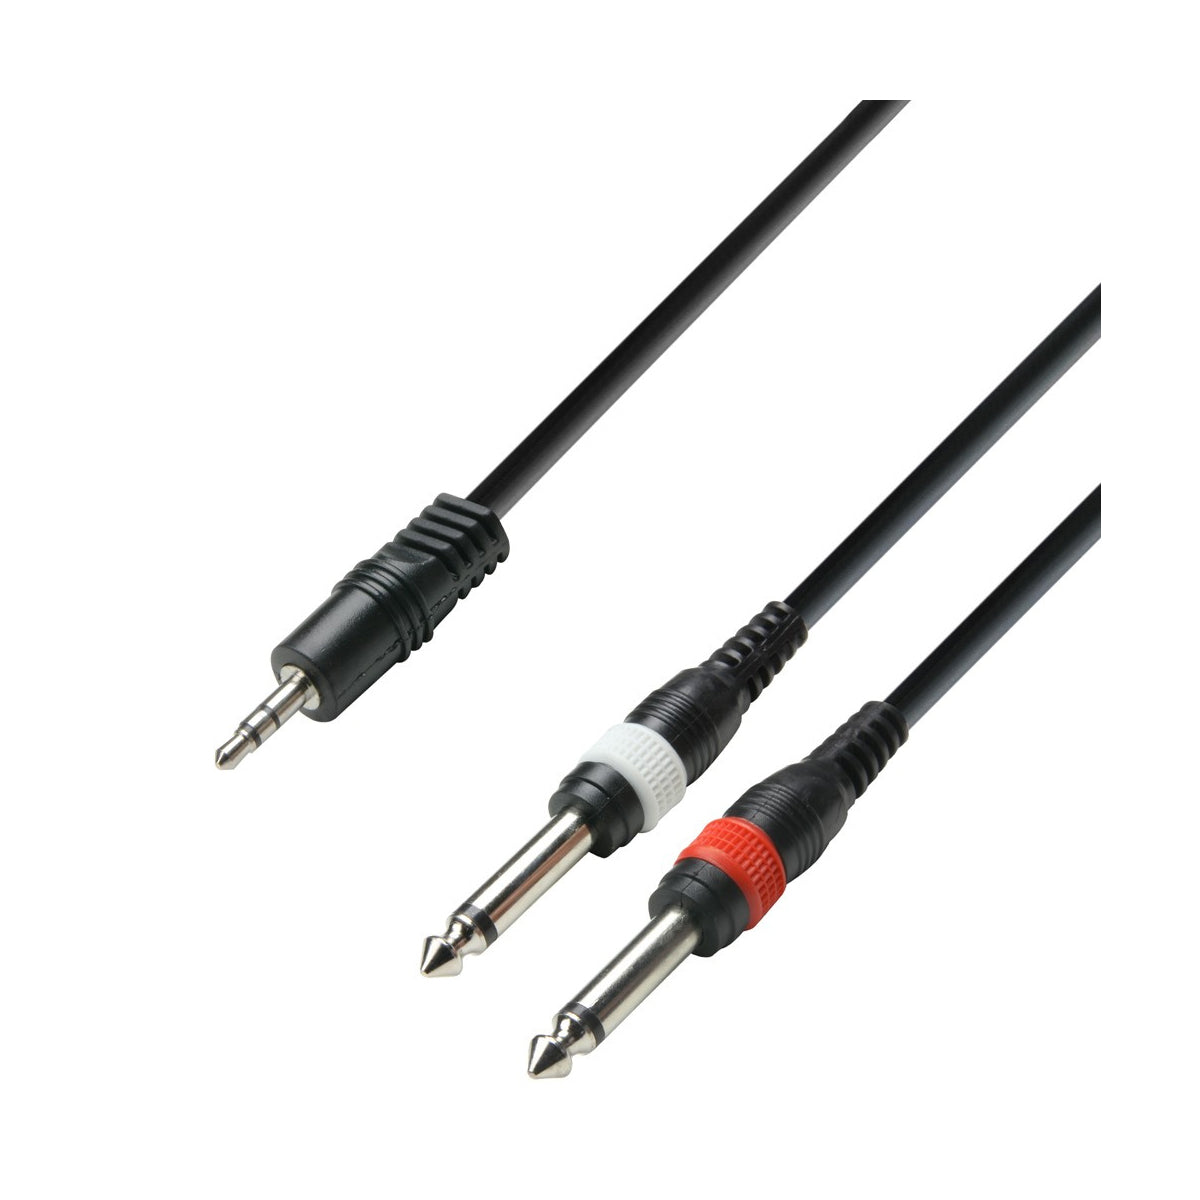 Adam Hall Cables K3 YWPP 0100 - Audio Cable 3.5mm Jack stereo to 2 x 6.3mm Jack mono 1m